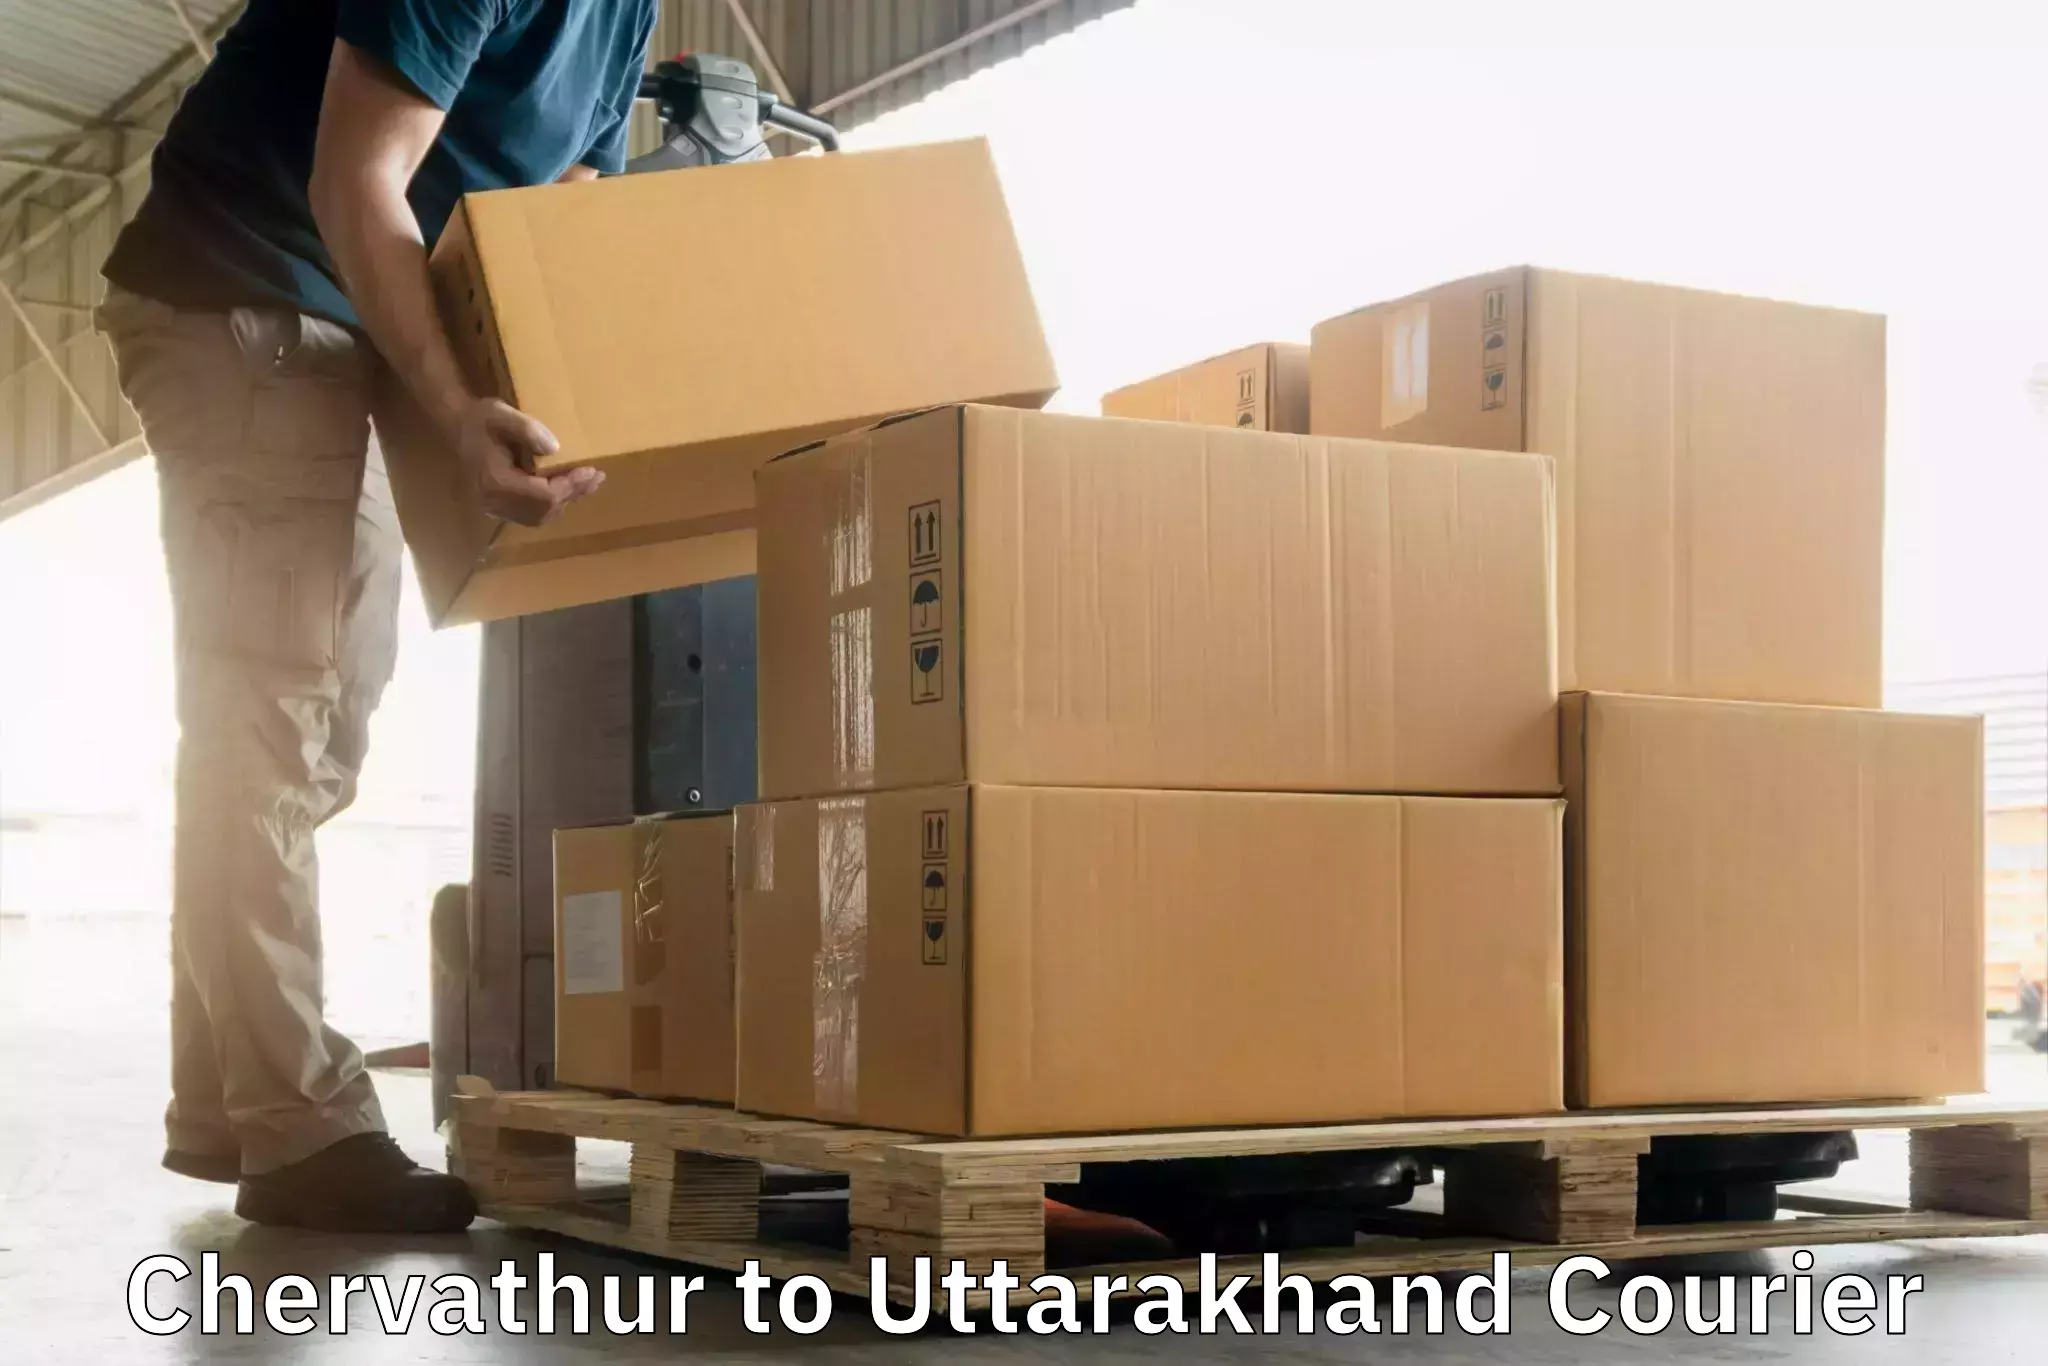 Flexible delivery schedules Chervathur to Udham Singh Nagar